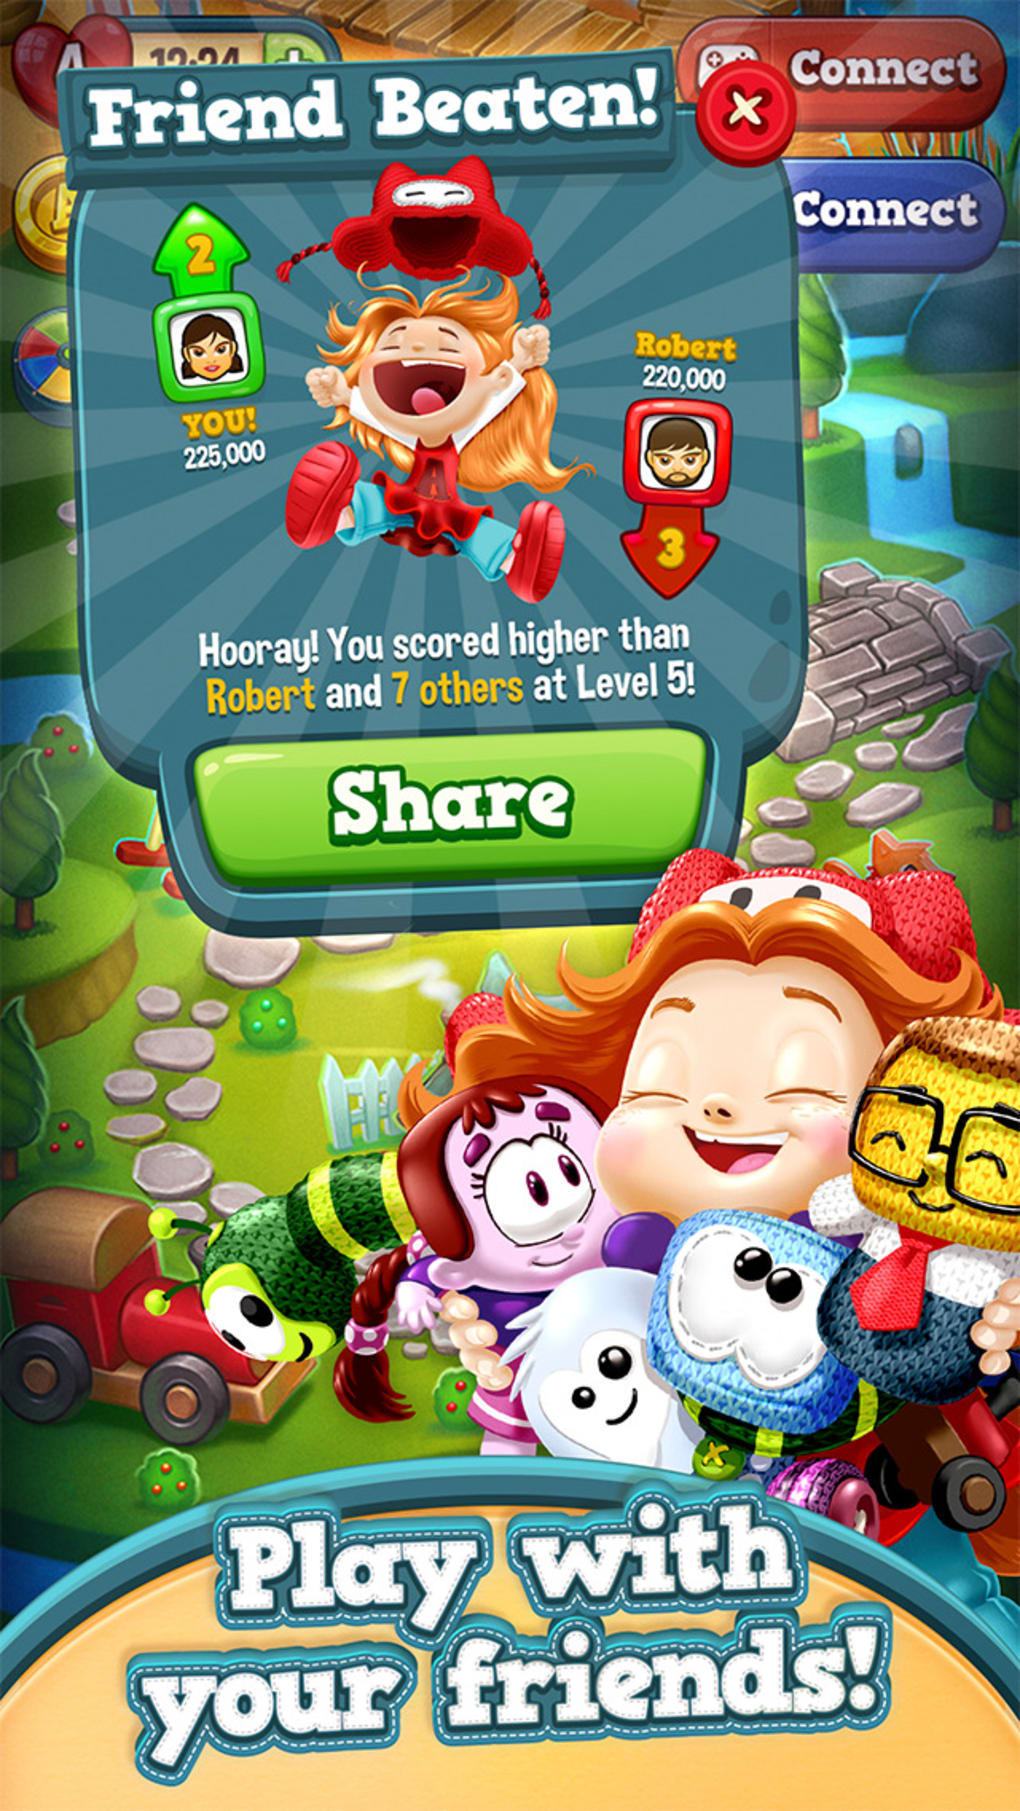 Download the game toy blast